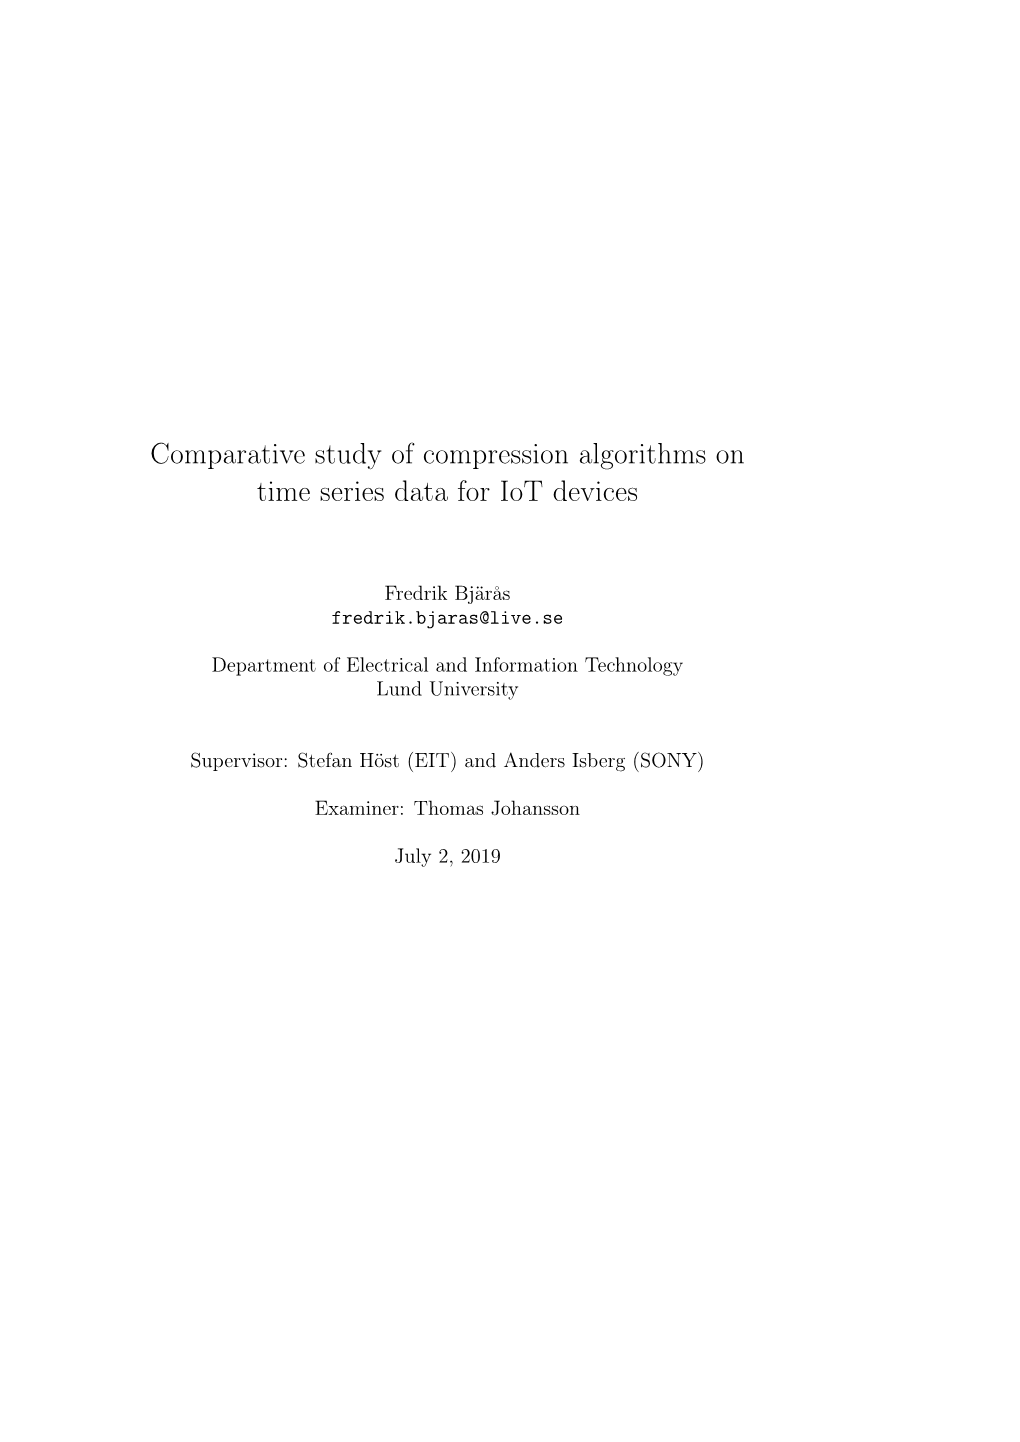 Comparative Study of Compression Algorithms on Time Series Data for Iot Devices